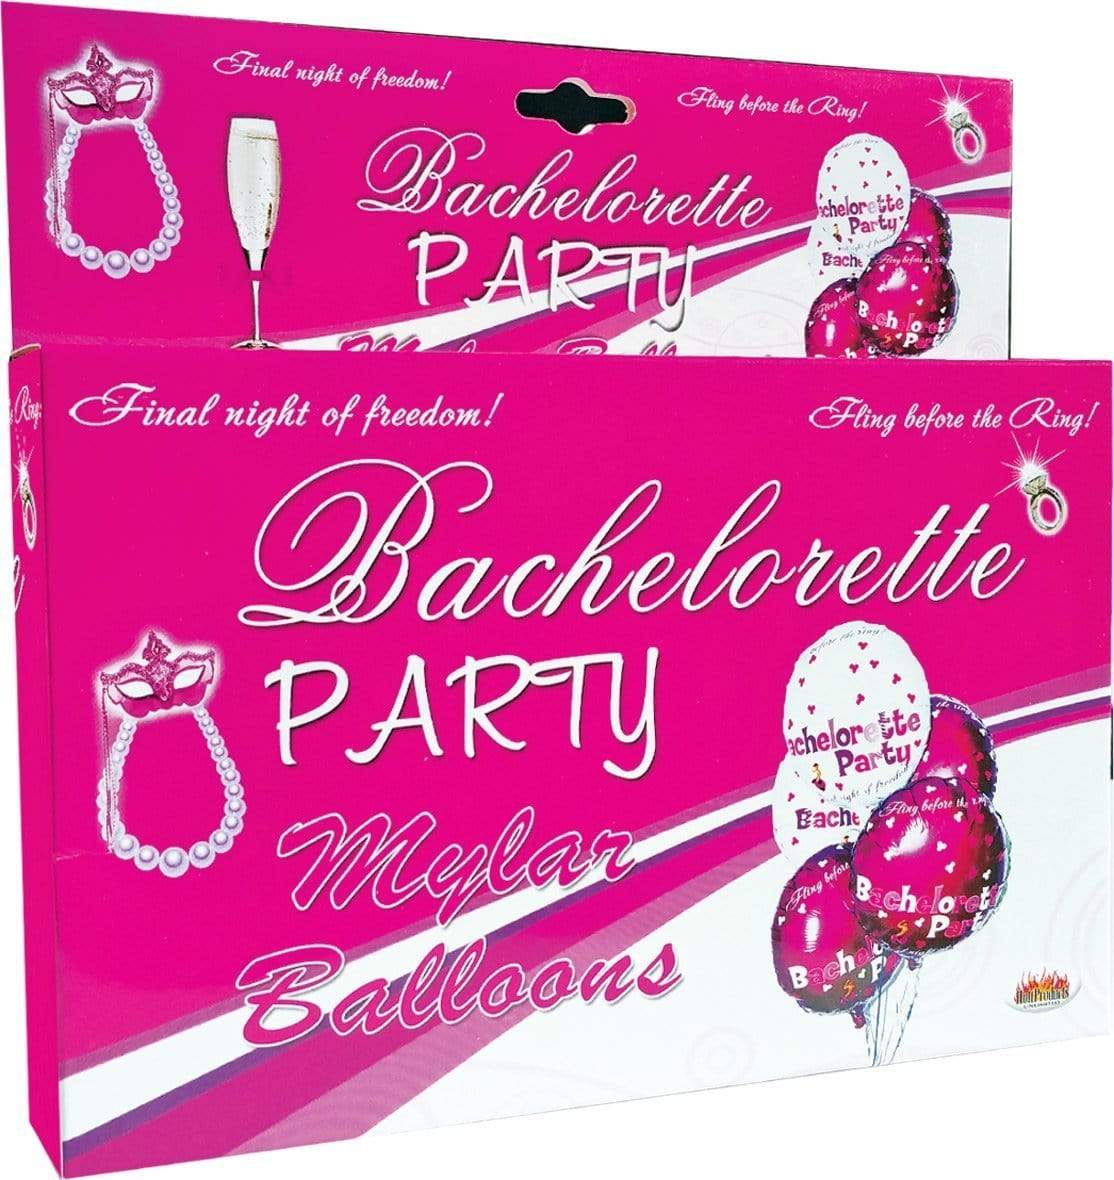 bachelorette party foil balloons 9 pack assorted colors